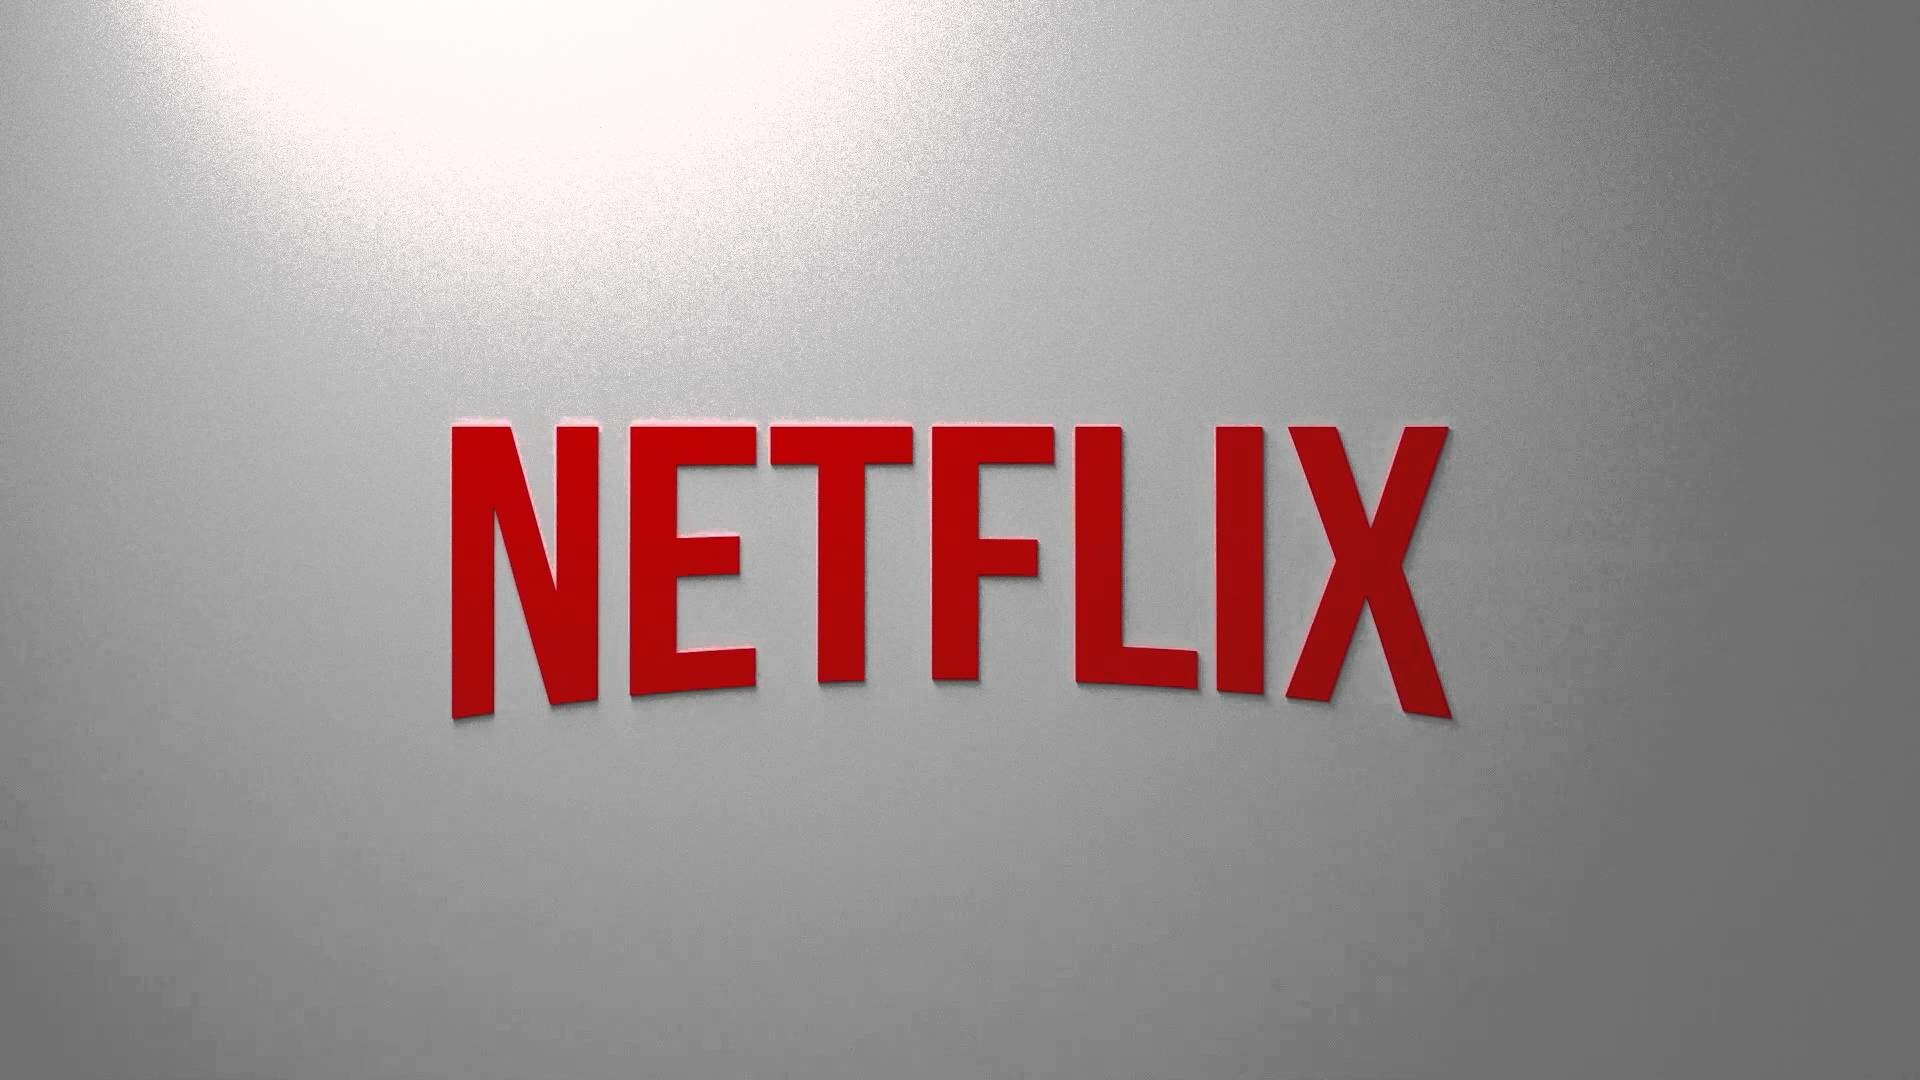 Netflix: Aesthetic, Logo, Brand, Involved in the creation of original programming. 1920x1080 Full HD Background.